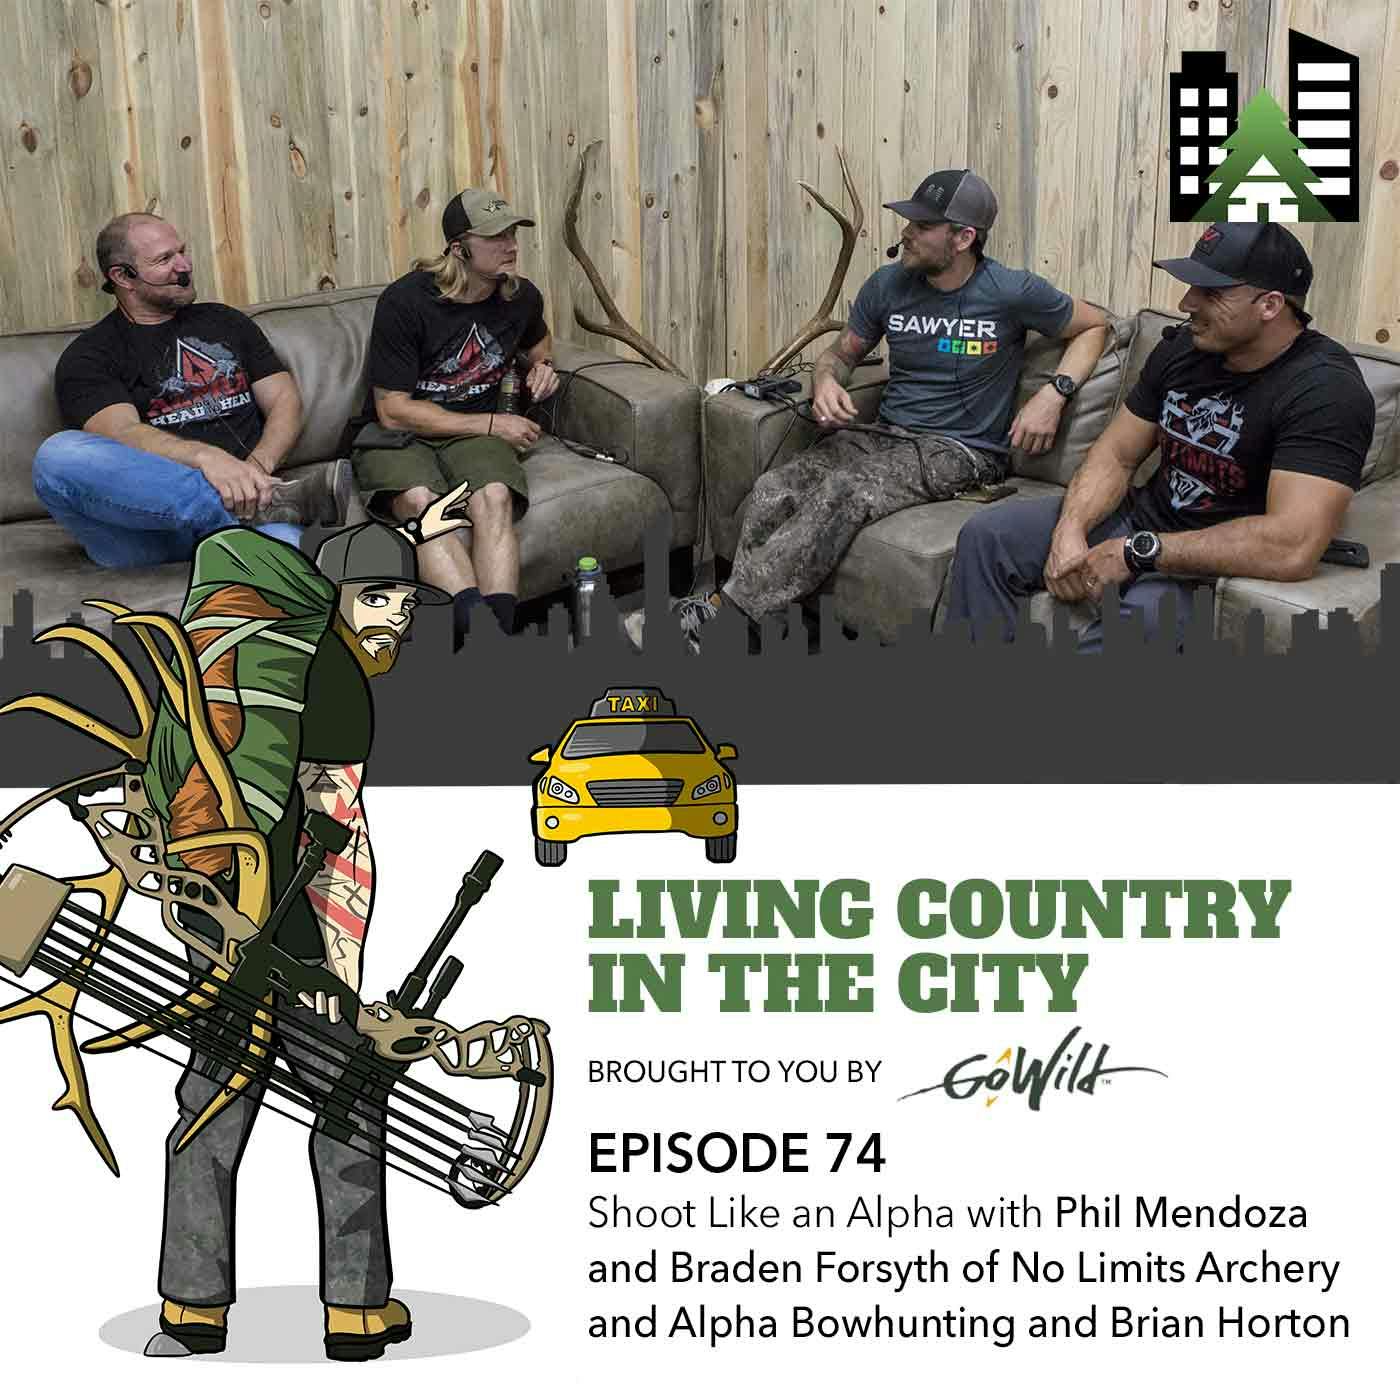 Ep 74 - Shoot Like an Alpha with Phil Mendoza and Braden Forsyth of No Limits Archery and Alpha Bowhunting and Brian Horton